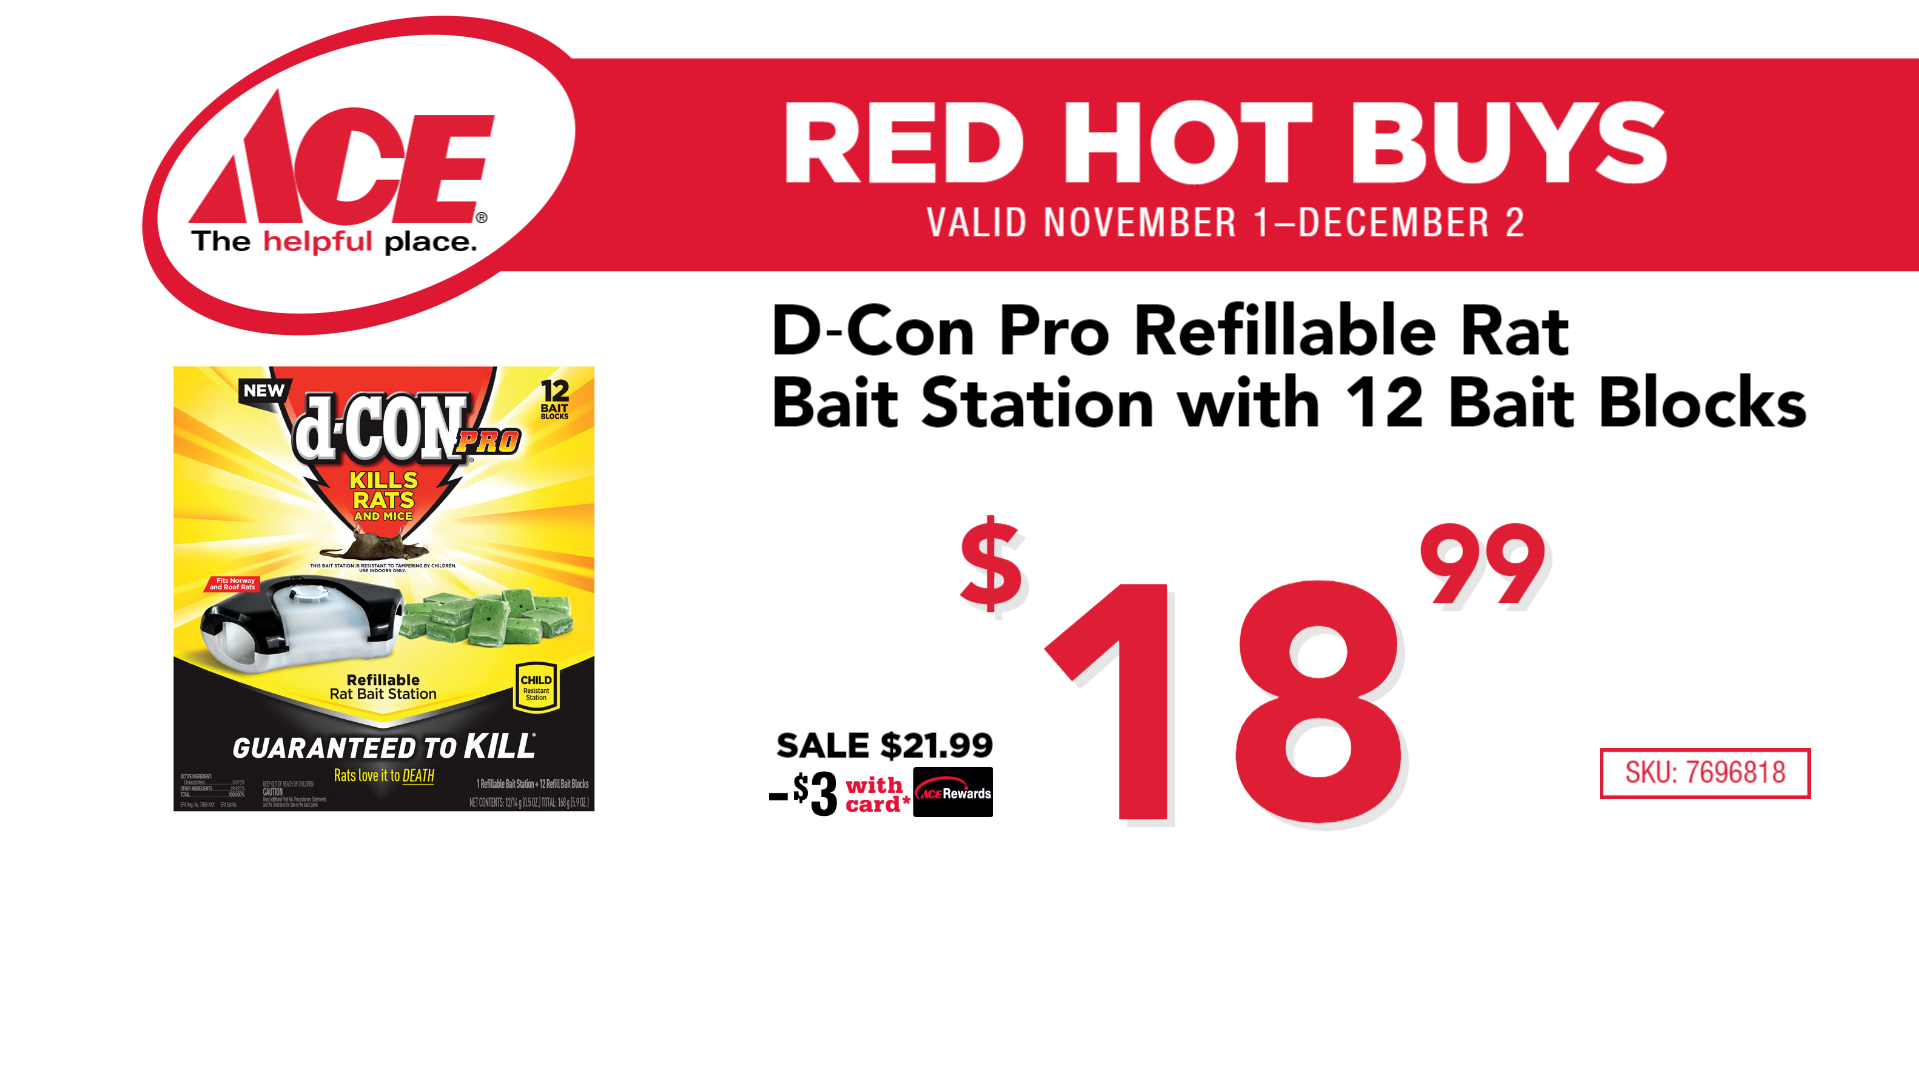 Charlevoix Ace Hardware November 2019 Red Hot Buys